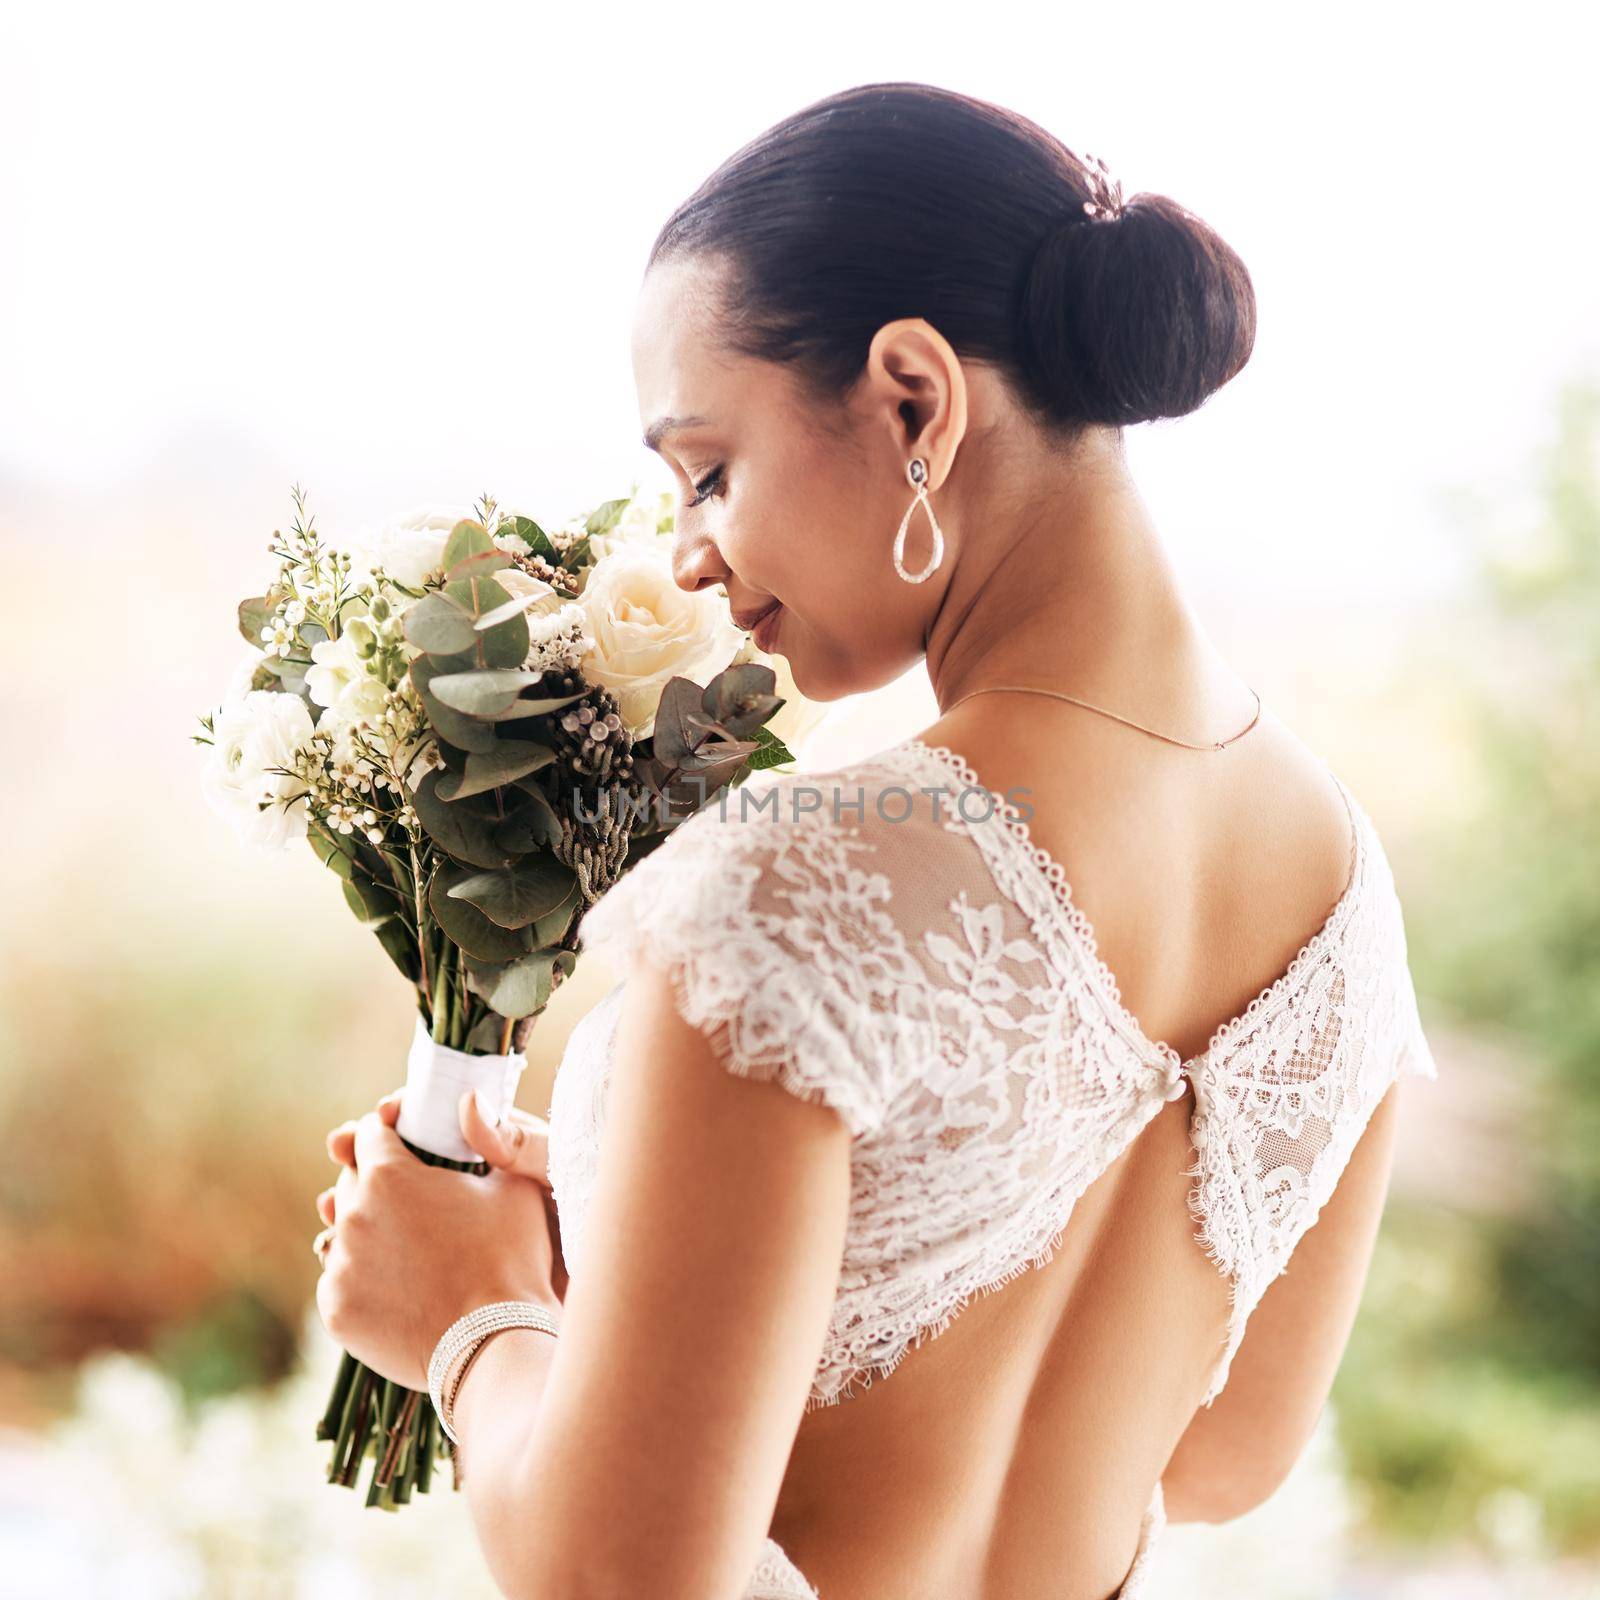 The scent of love. a beautiful young bride smelling her bouquet of flowers outdoors on her wedding day. by YuriArcurs